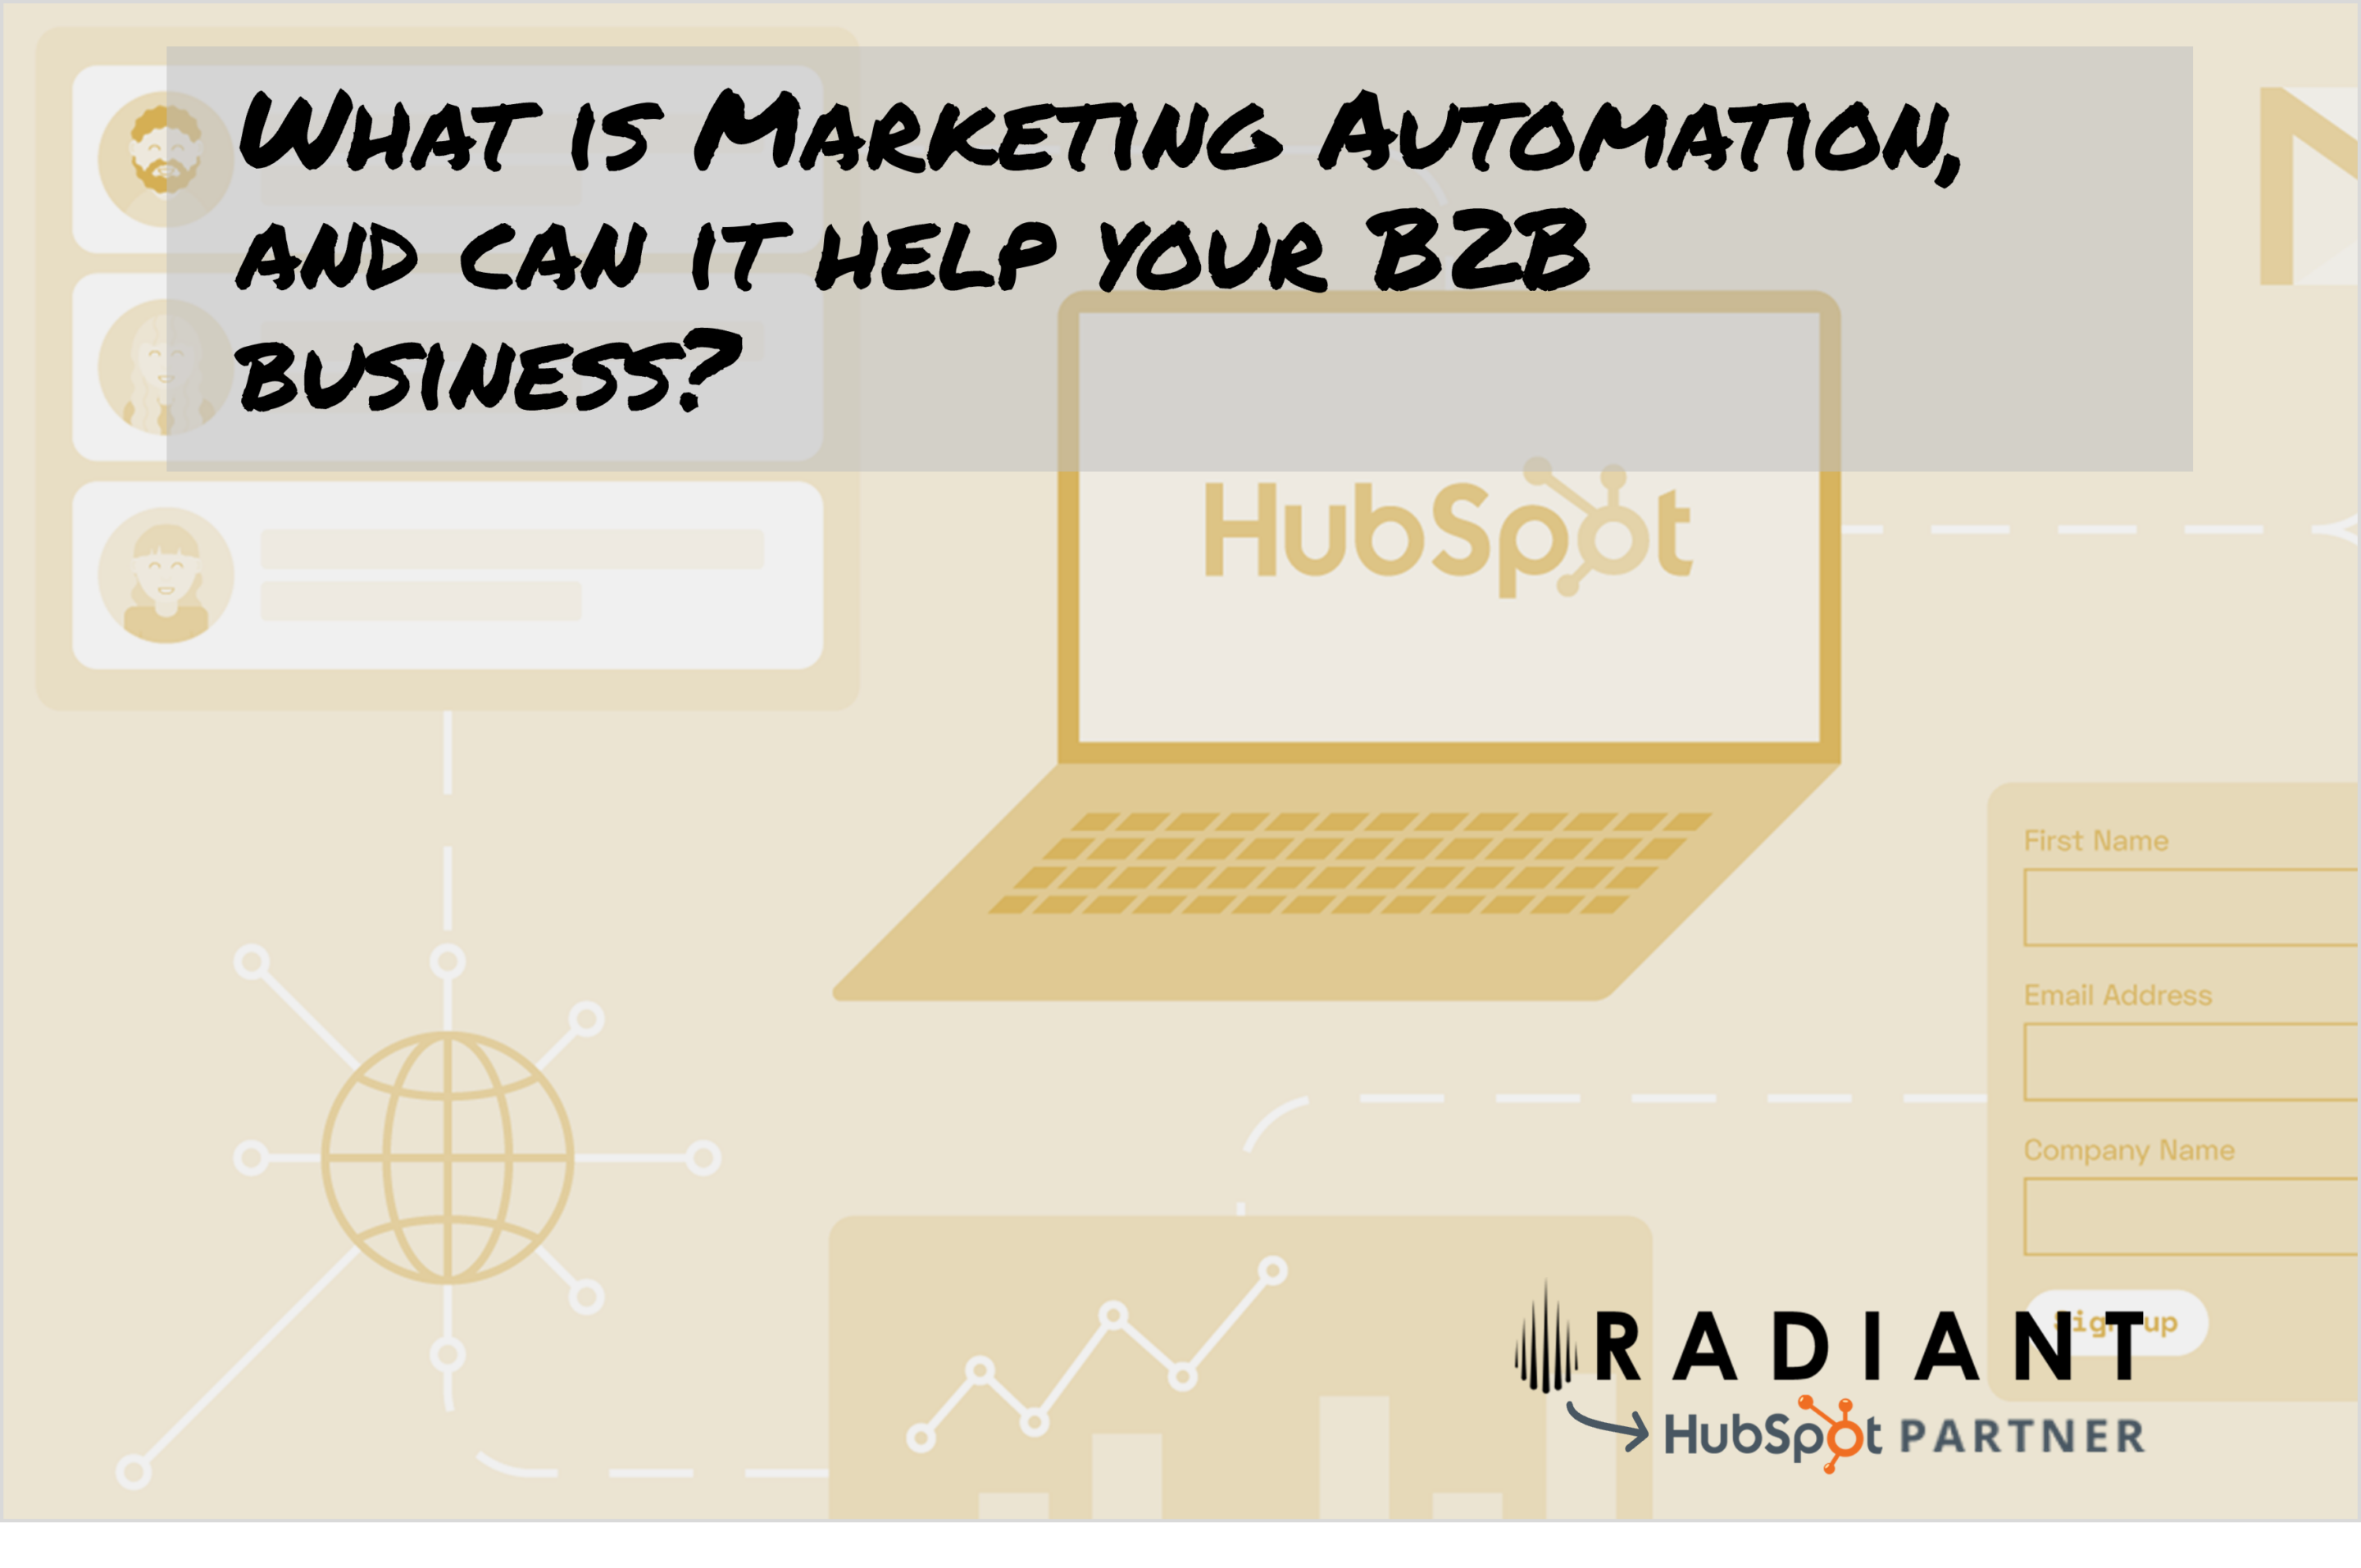 This article will tell you what marketing automation is and how it can help your B2B business with emails, landing pages and much more.